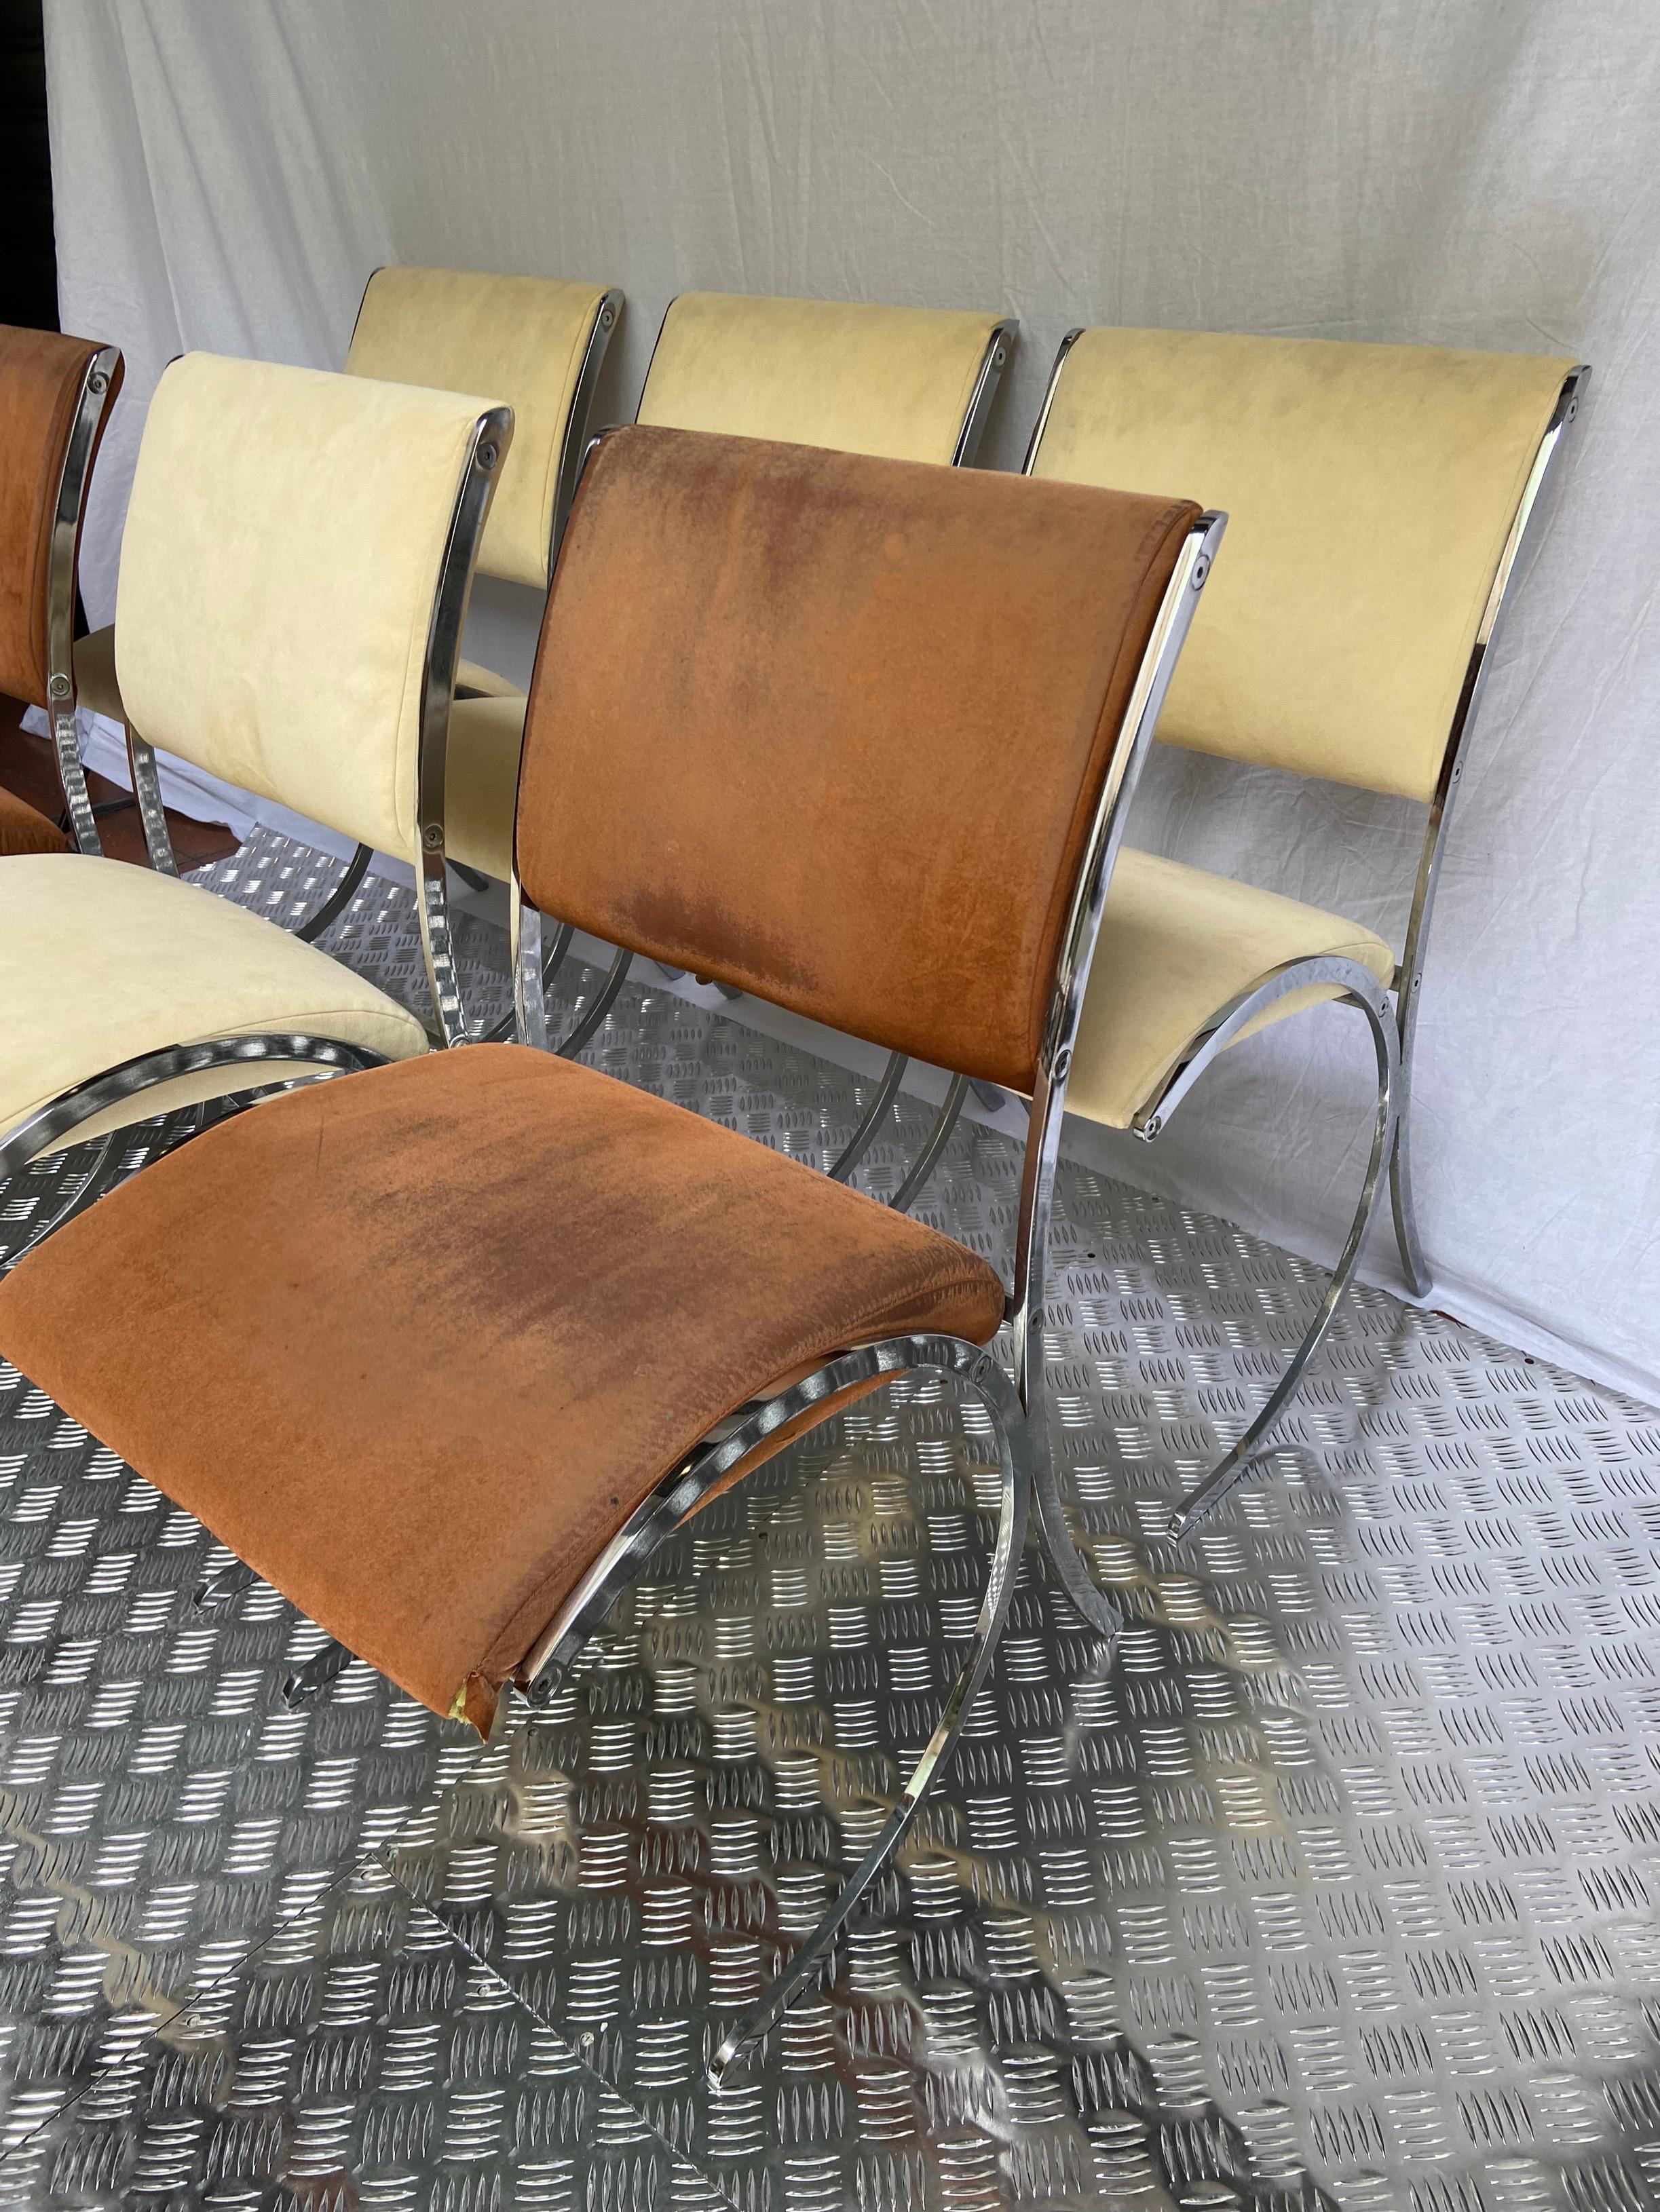 6 chairs - Boris Tabacoff - Circa 1970
Edited by Christofle

Chromed metal and beige (4) and brown (2) fabric covering
Fabric restored to new
Measures: 82 x 44 x 52 cm.